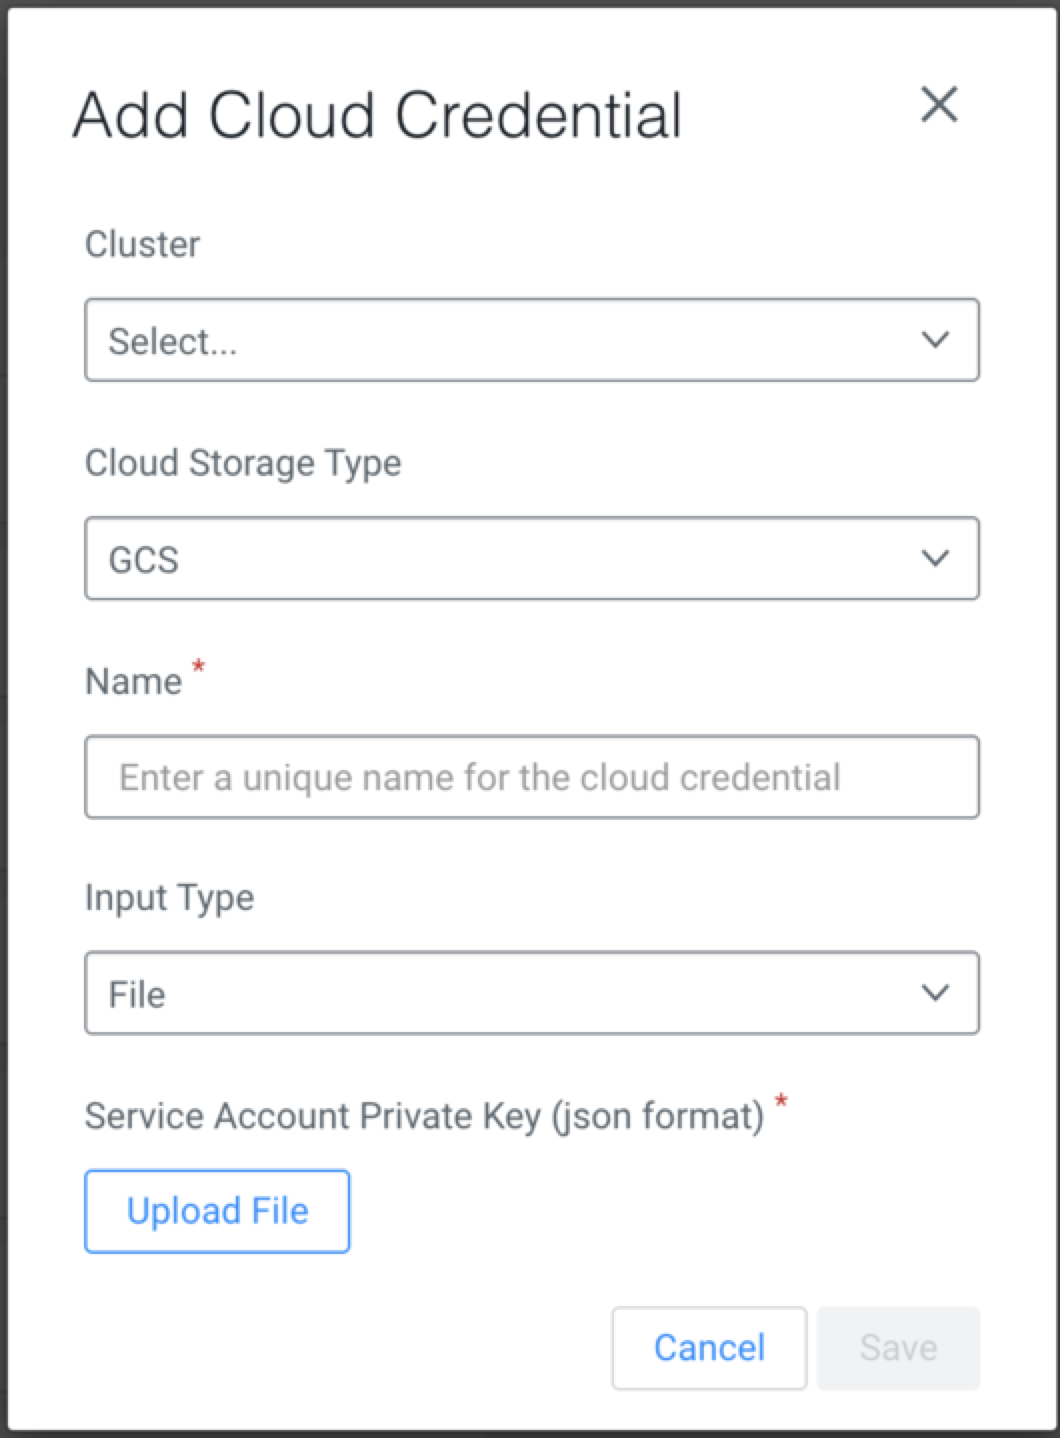 The image shows the options that appear when you choose GCS cloud storage type and File input type.